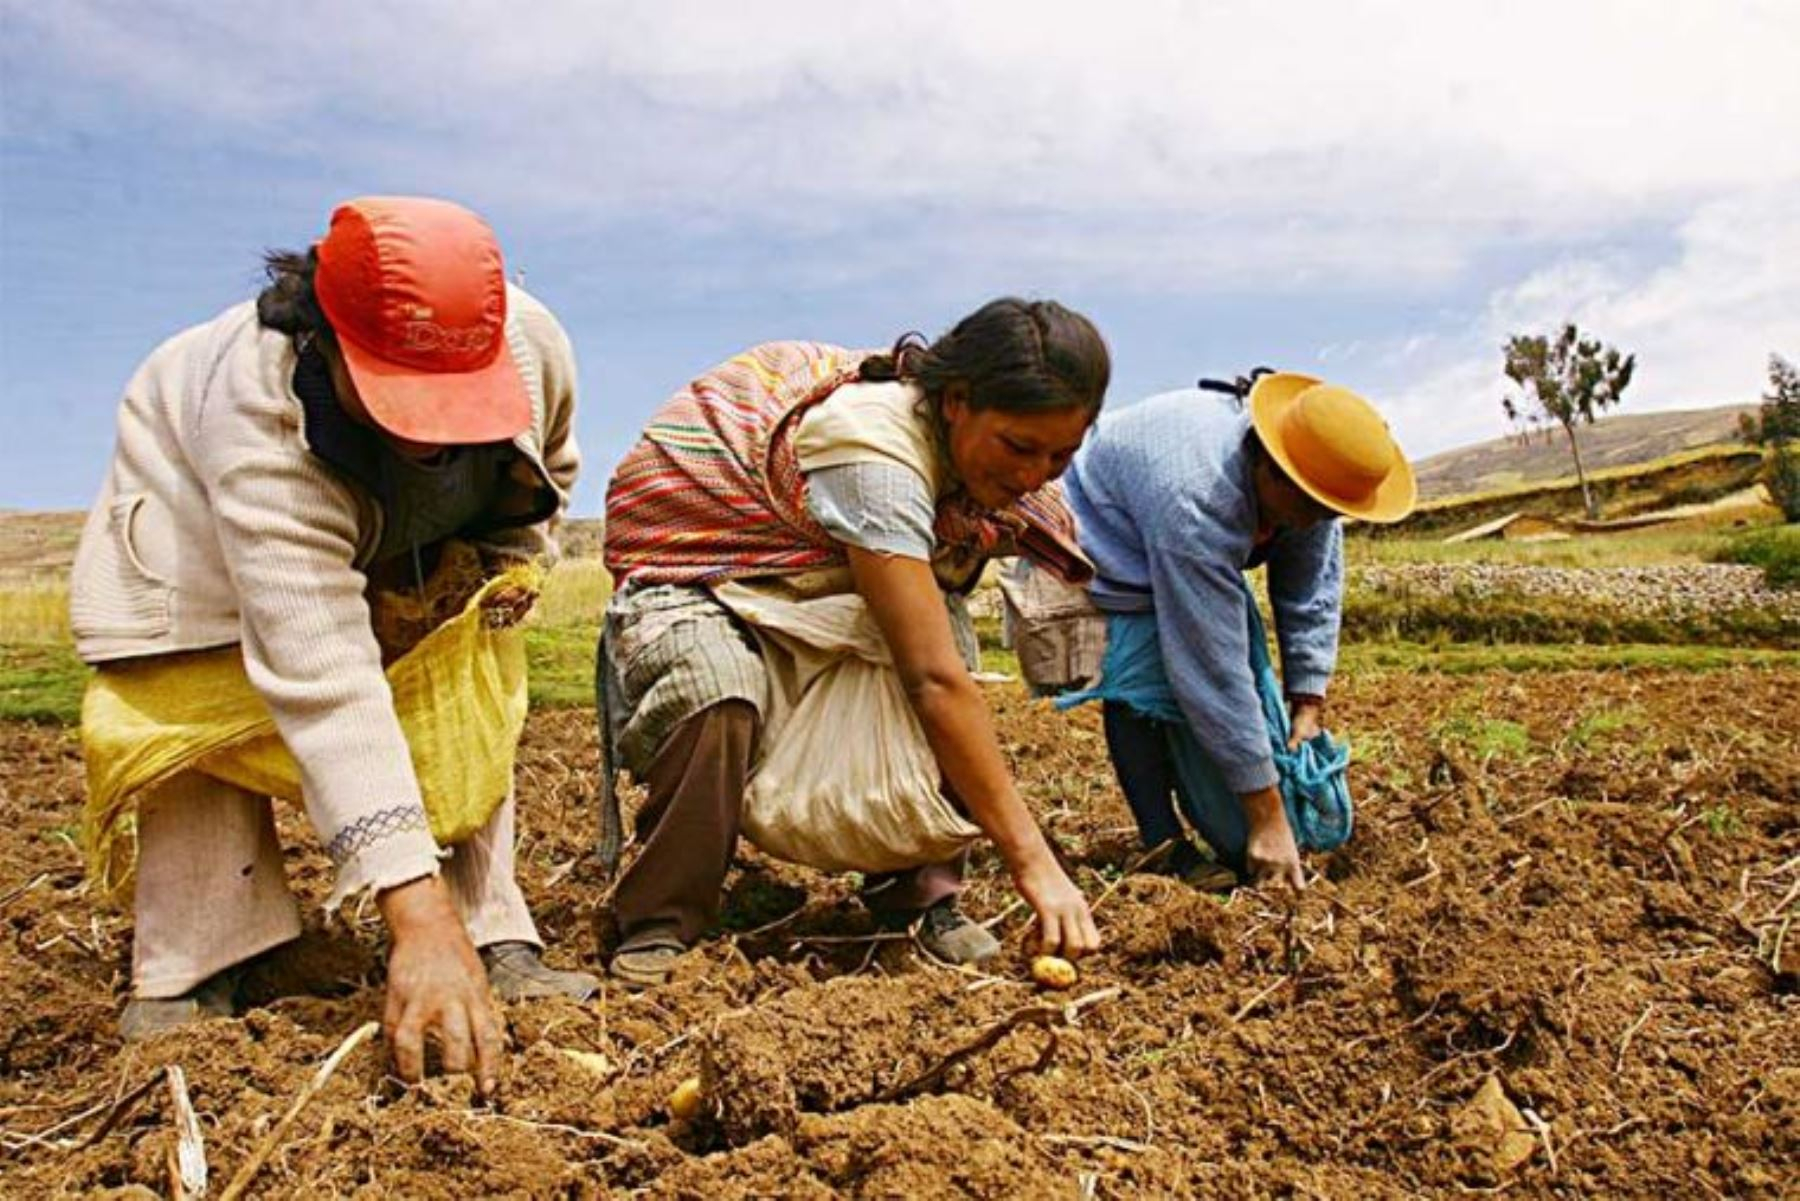 Food insecurity: 4 out of 10 farmers are poor in Peru